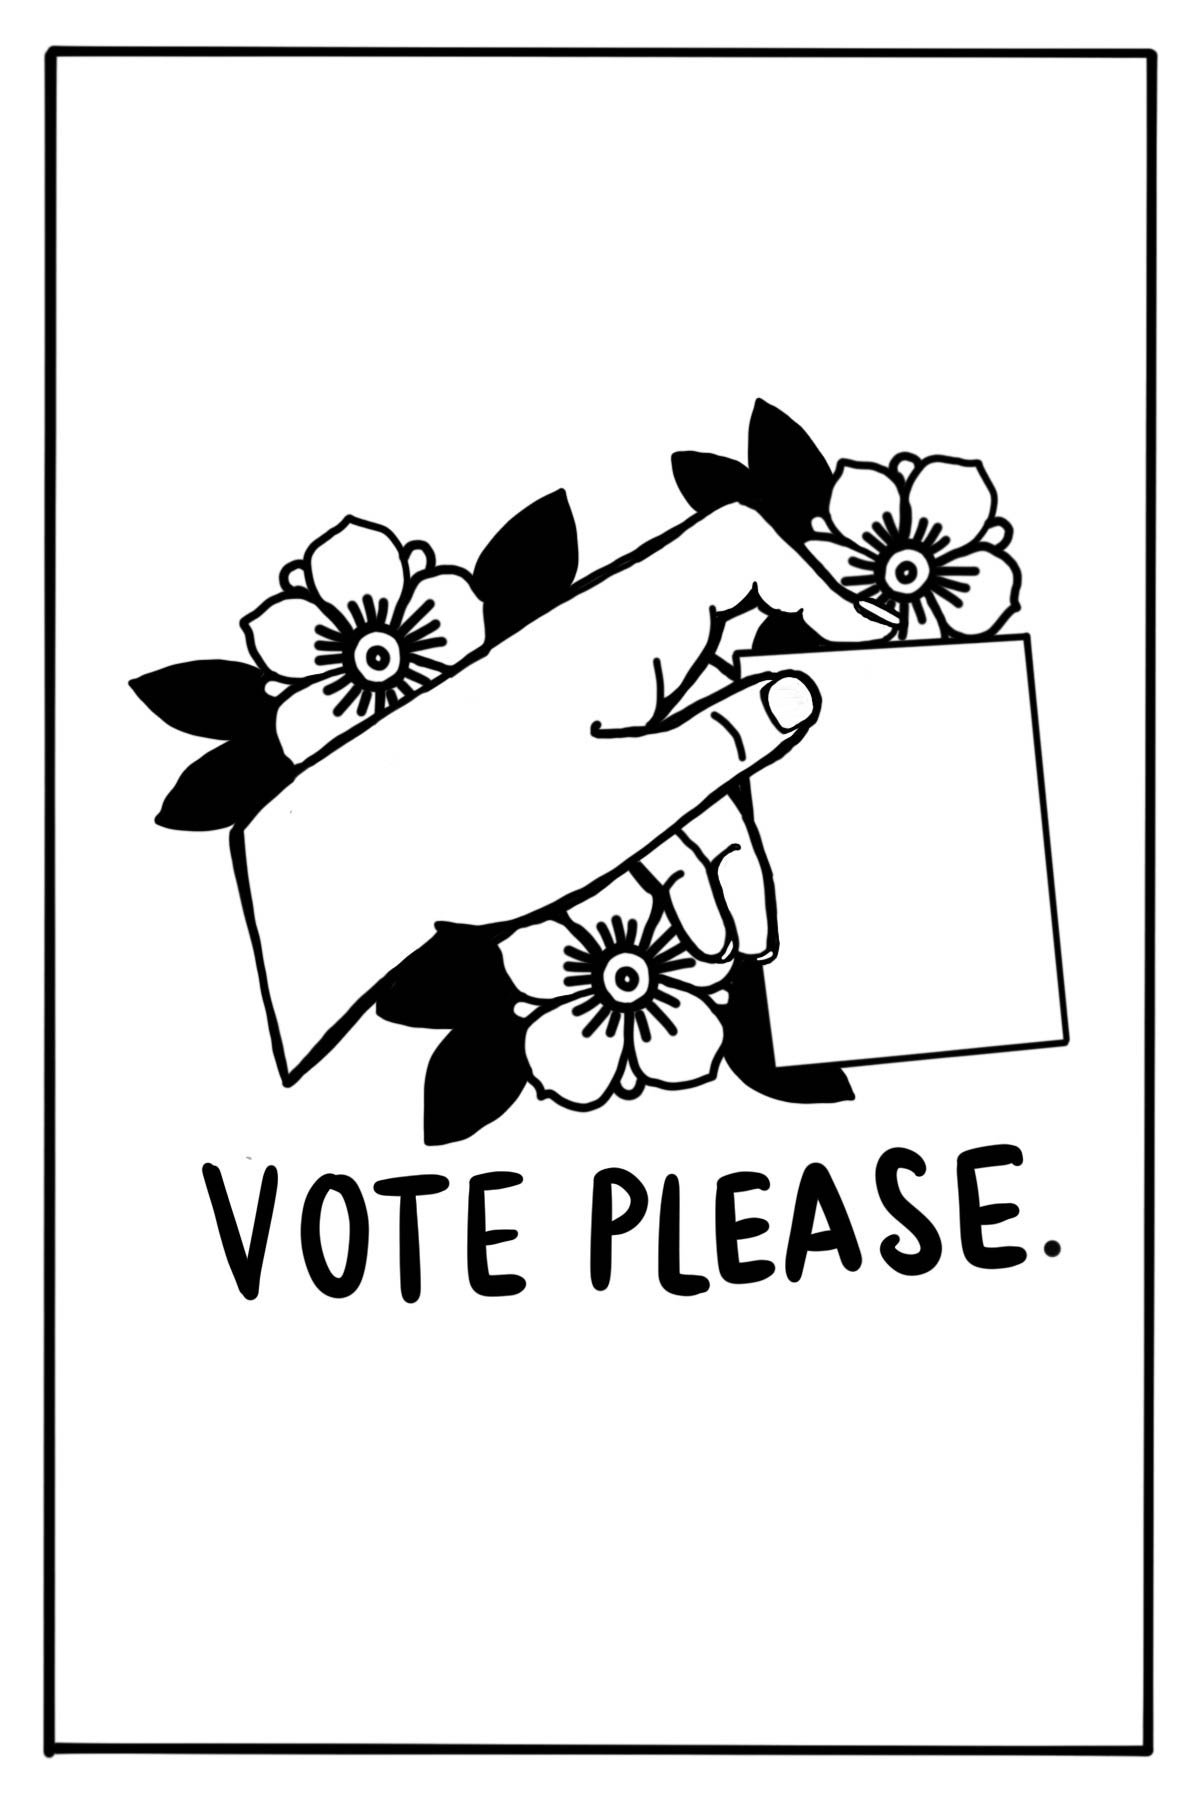 Illustration of a hand holding a card that says vote please